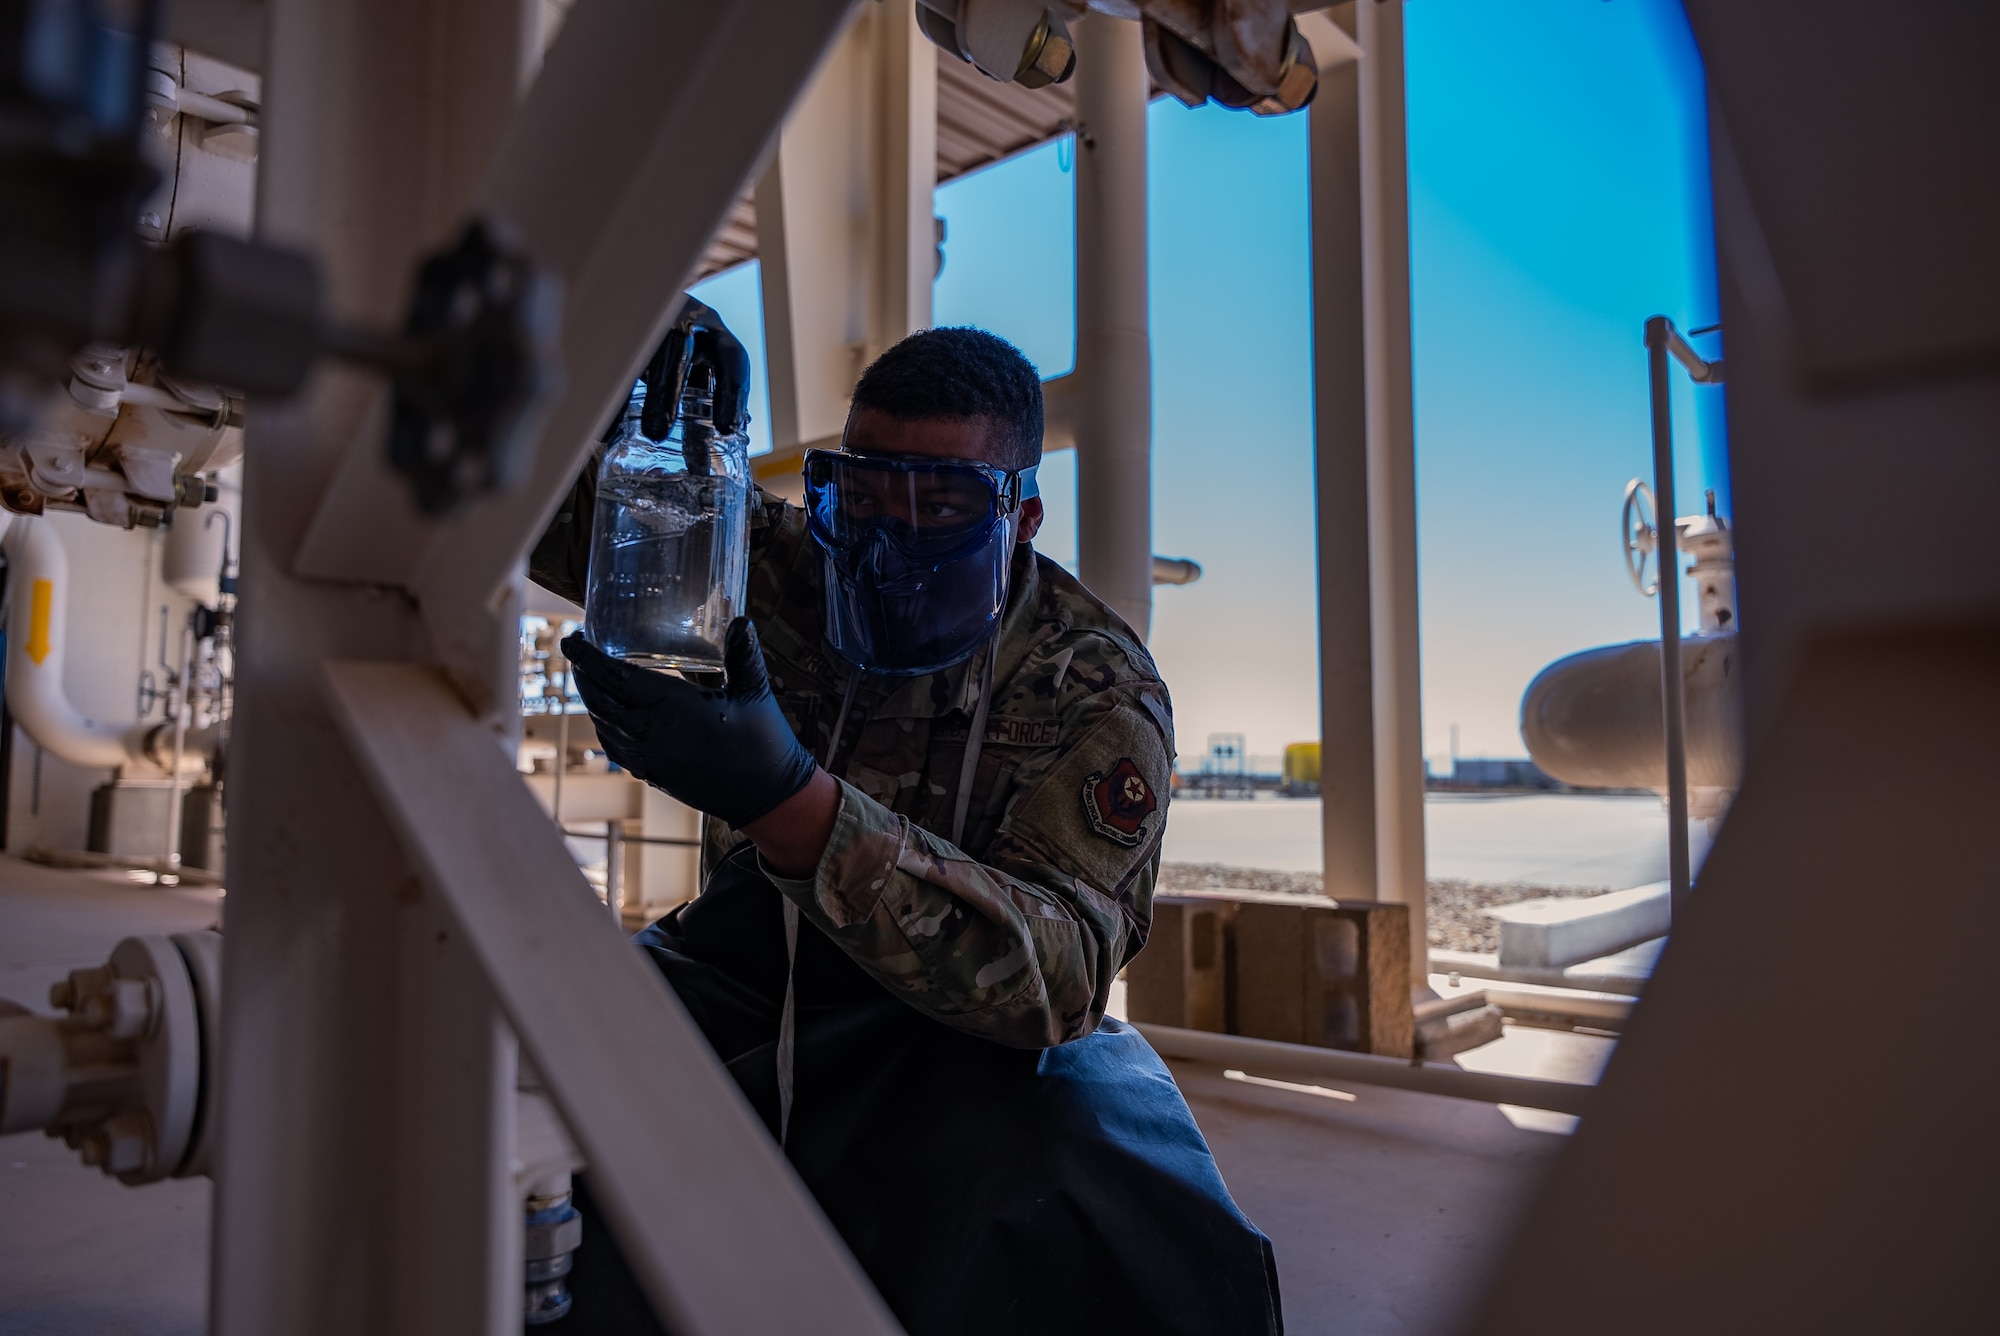 U.S. Air Force Senior Airman Jalen Price, 27th Special Operations Logistic Readiness Squadron Fuels Management Flight facilities Airman, checks the clarity of fuel at Cannon Air Force Base, N.M., April 14, 2023. The 27th LRS was awarded the first place 2022 American Petroleum Institute Award by the U.S. Air Force for the Best Fuels Organization out of 78 flights. (U.S. Air Force photo by Senior Airman Alexcia Givens)